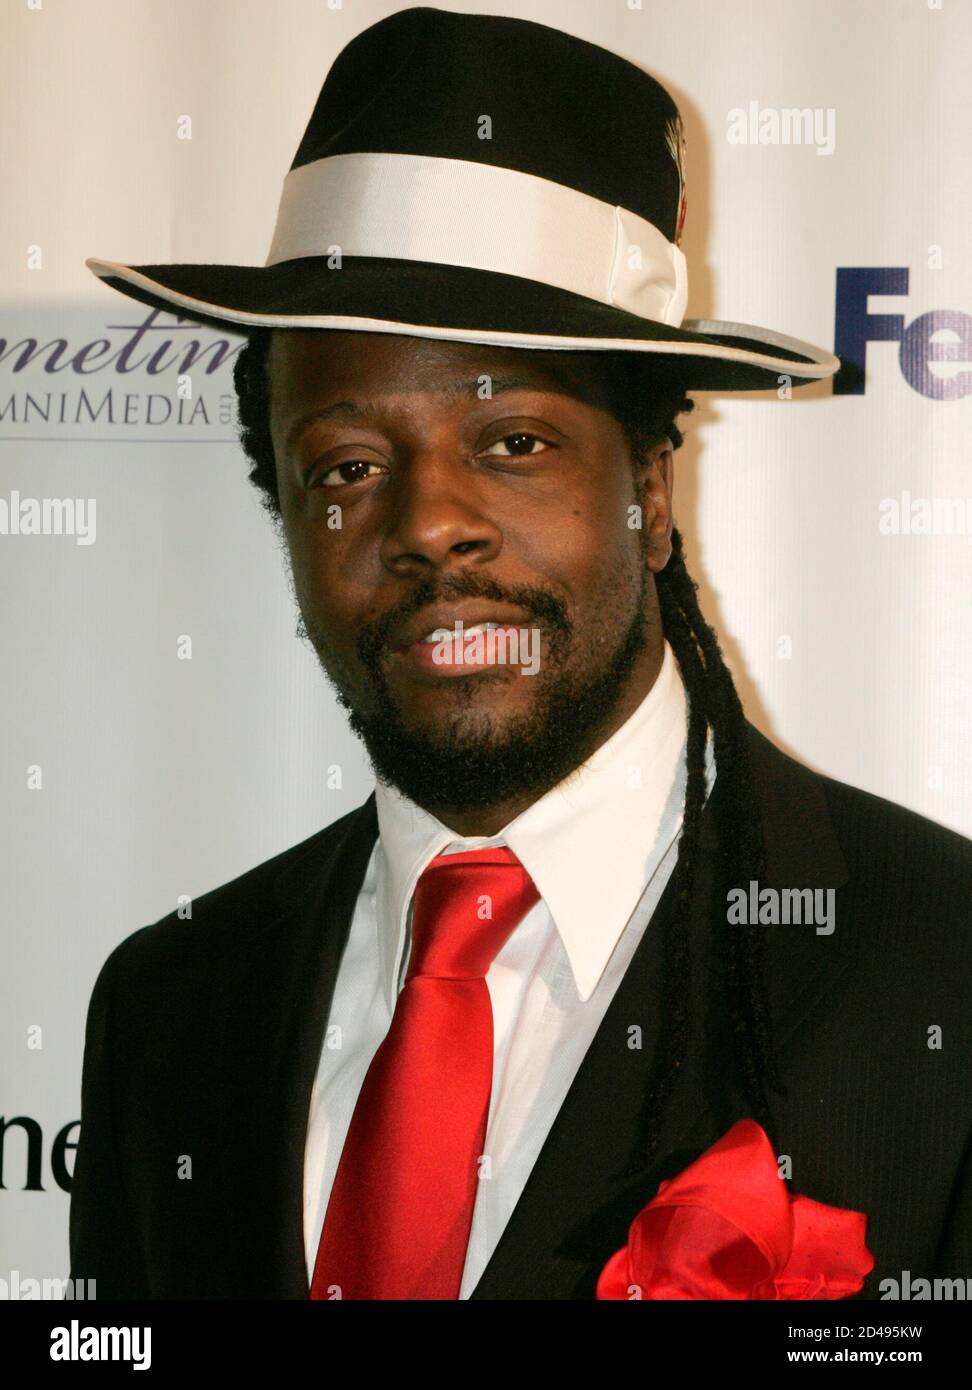 Haitian-American hip-hop artist Wyclef Jean poses for photographers at the  Ebony Magazine party in Beverly Hills, California February 24, 2005.  REUTERS/Fred Prouser SN/JJ Stock Photo - Alamy